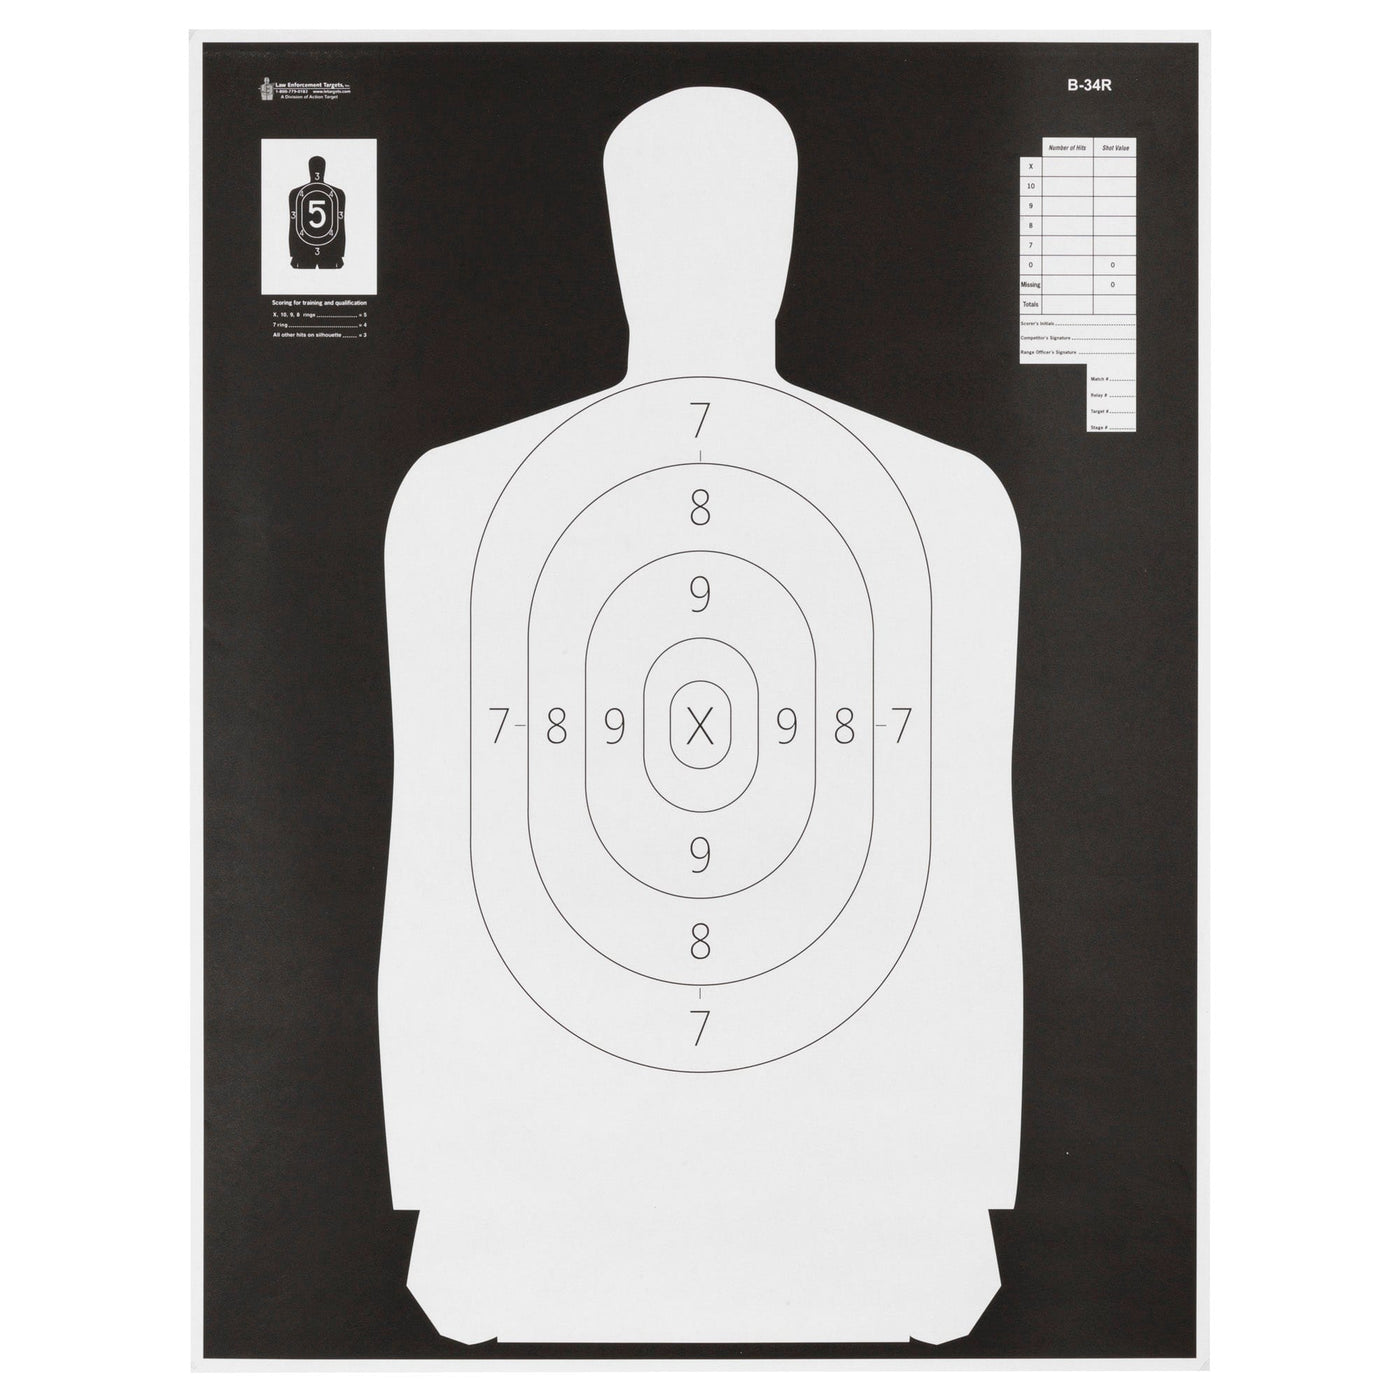 Action Target Action Tgt B34 Blk/wht Silho 100pk Targets